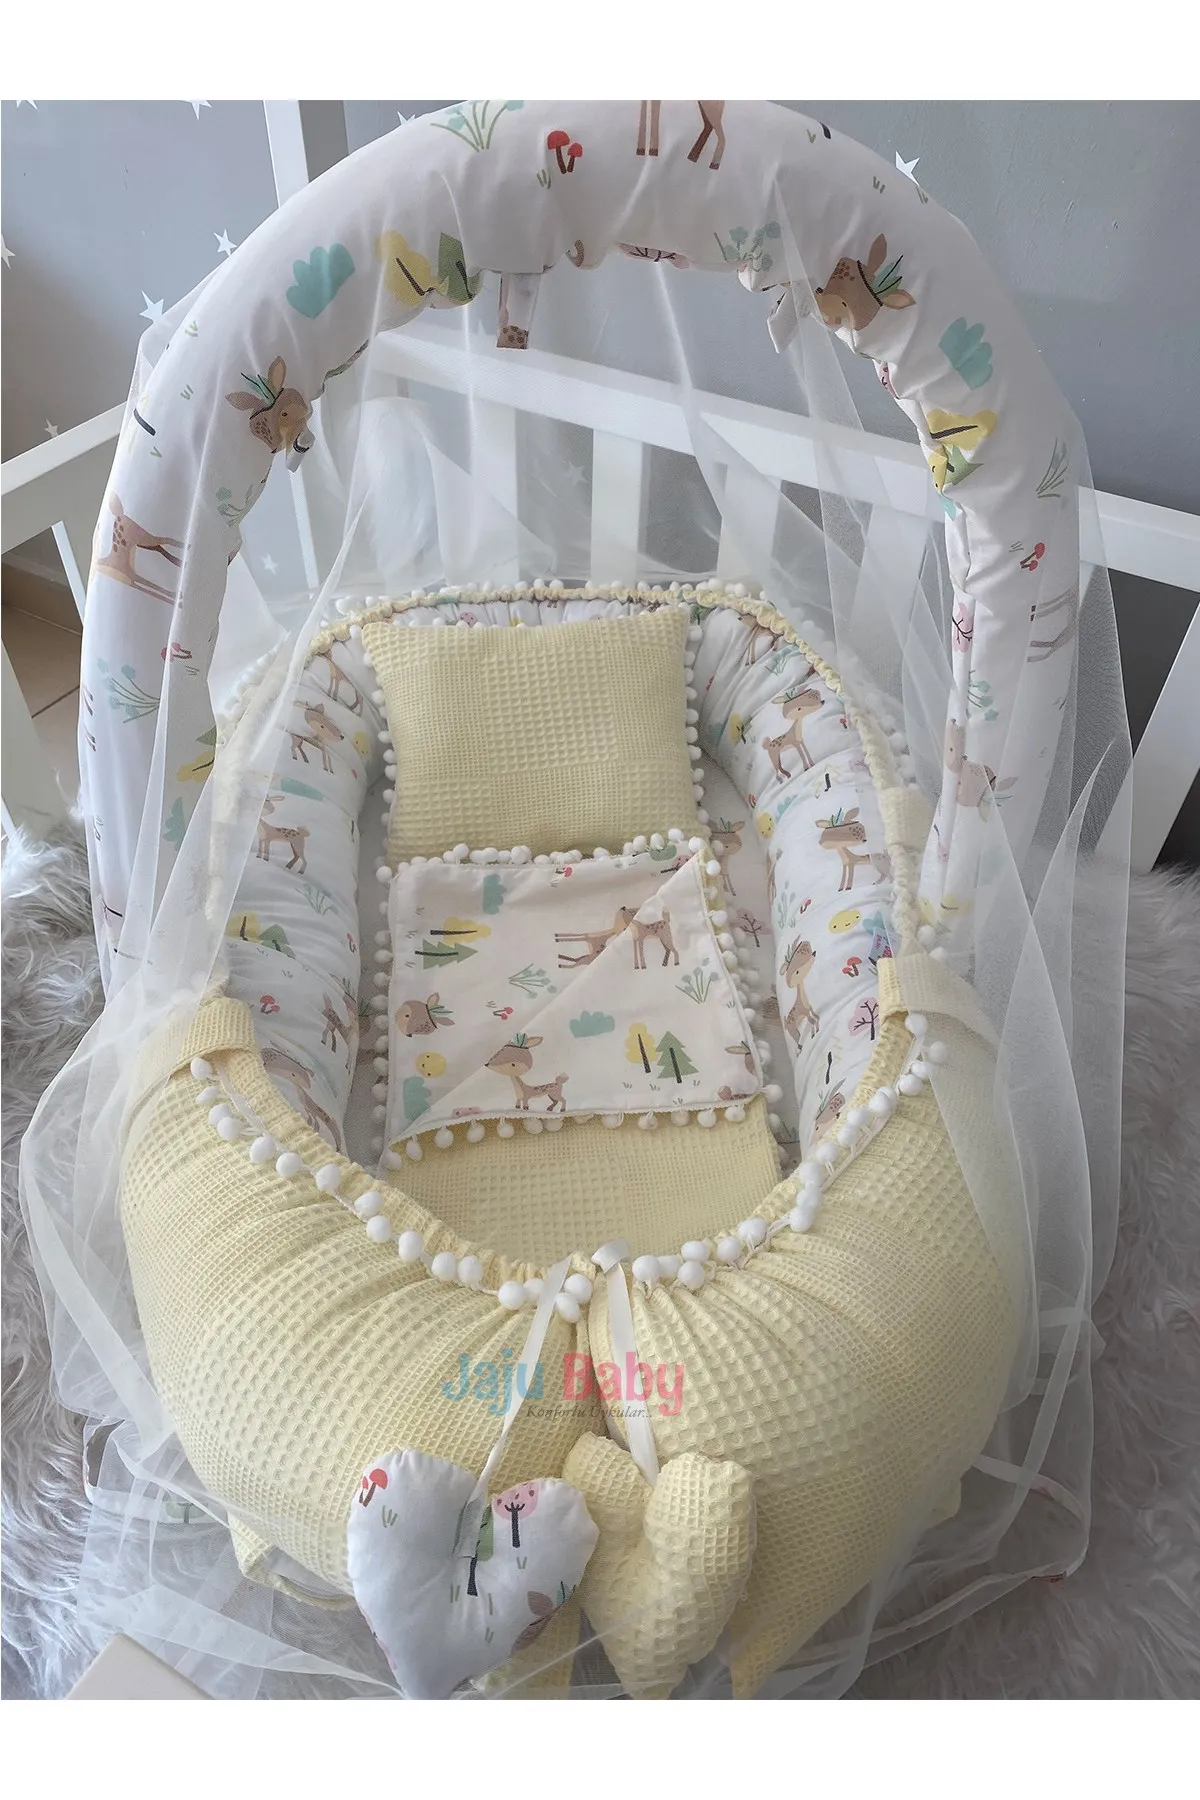 Jaju Baby Handmade Yellow Waffle Pique Fabric Gazelle Design Pompom Babynest Mosquito Net and Toy Apparatus, Portable Baby Bed